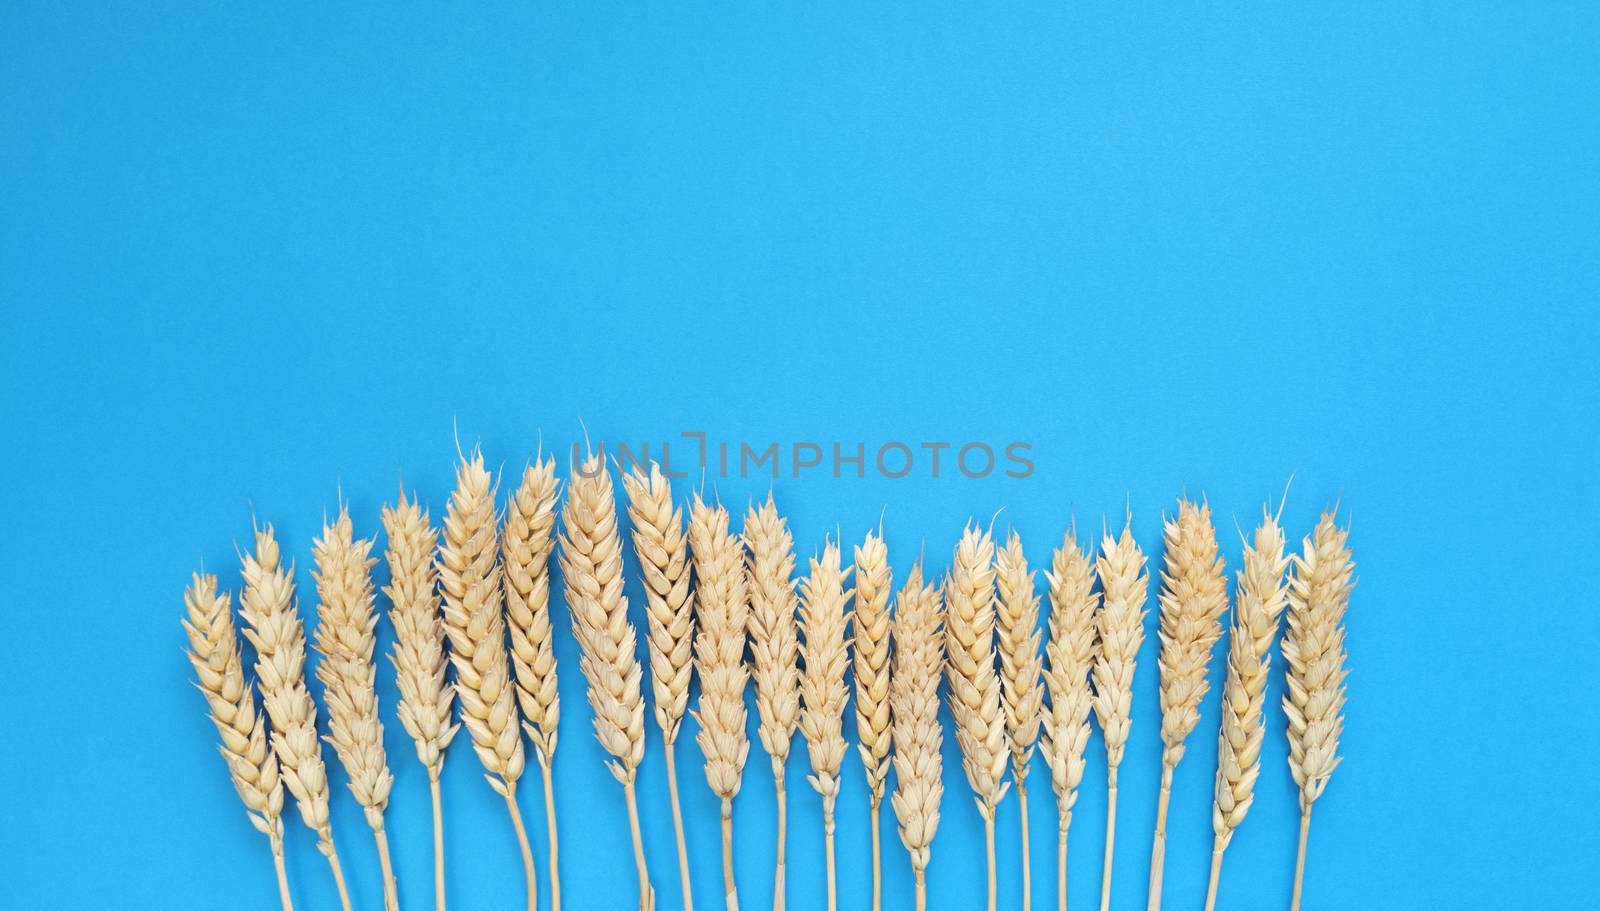 Spikelets of wheat on a blue background. Simple flat lay with copy space. Stock photo. by anna_artist